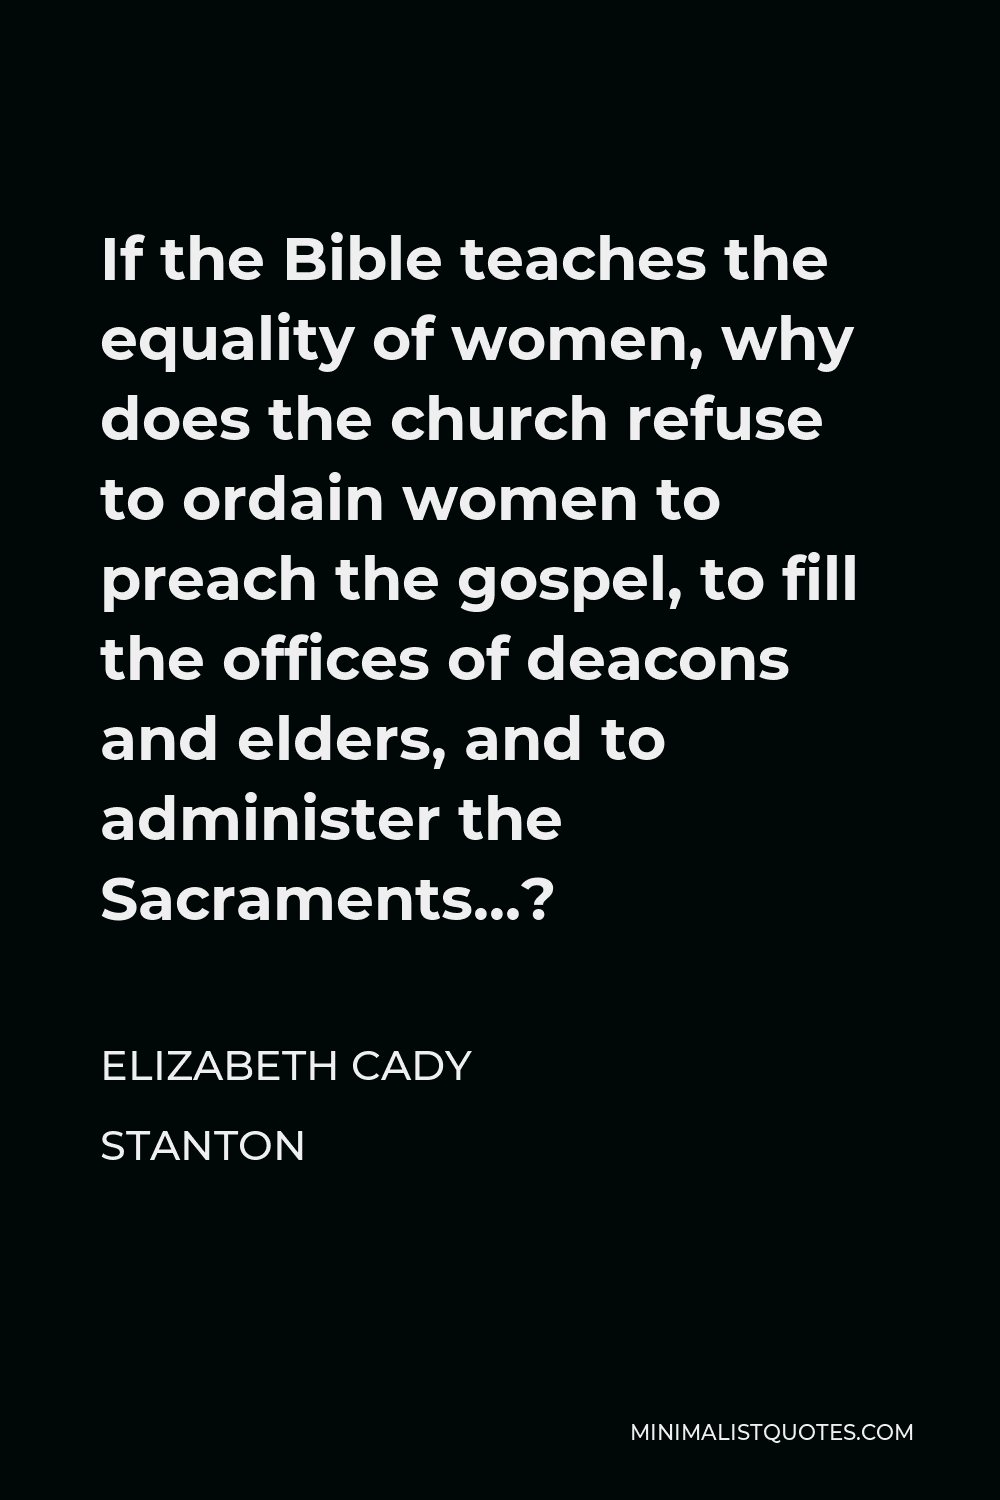 Elizabeth Cady Stanton Quote - If the Bible teaches the equality of women, why does the church refuse to ordain women to preach the gospel, to fill the offices of deacons and elders, and to administer the Sacraments…?